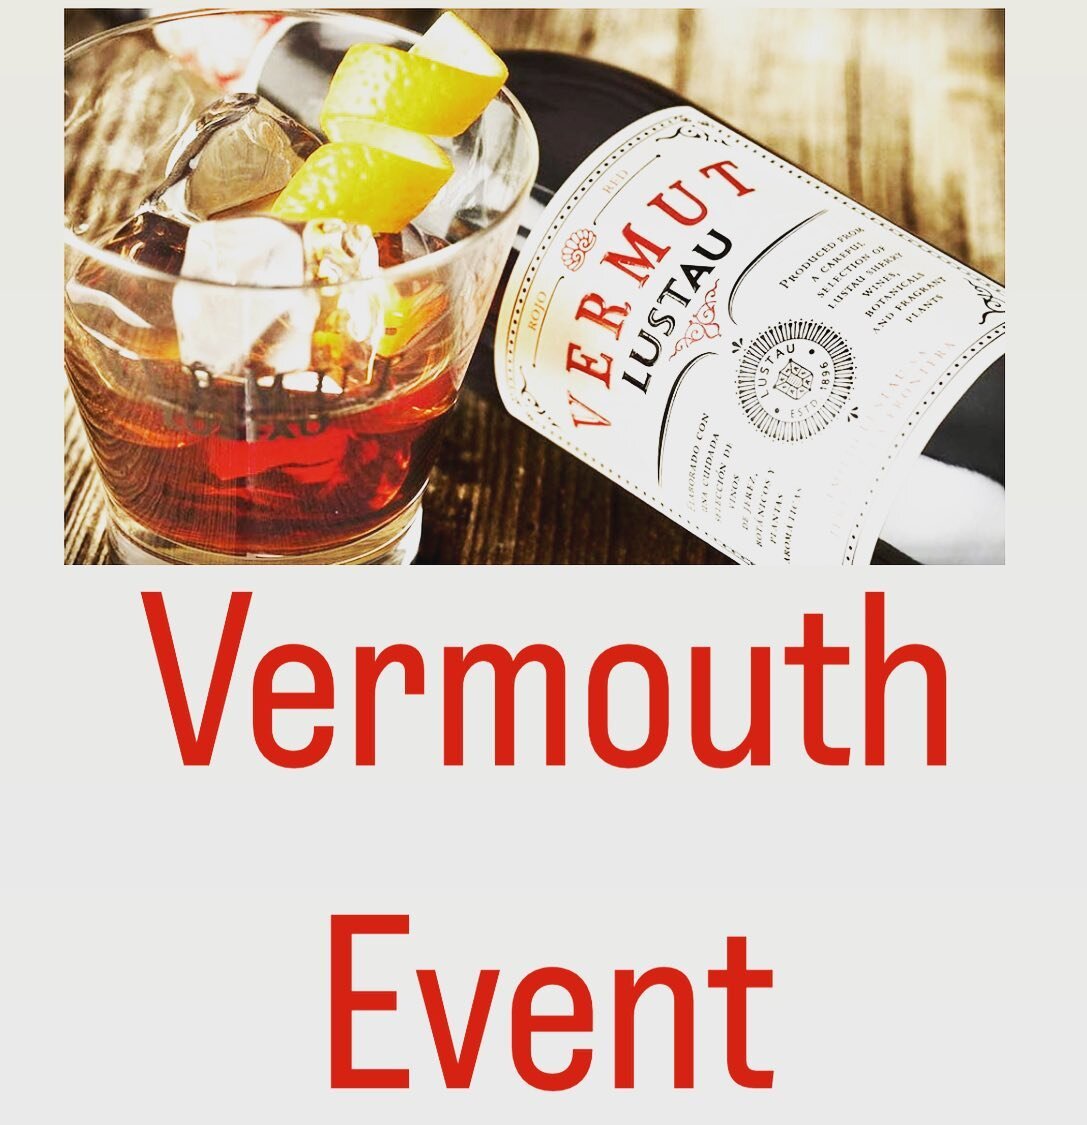 This Sunday we are featuring Vermouth!

3 of our favorite reps will be here pouring:
Lustao Red/Ros&eacute;/White (Spain)
Bordiga Red/White/Extra Dry (Italy)
Fred Jerbis (Italy)
Elena Penna (Italy)
Oka Kura Burmutto Sweet/Dry (Japan)
Mata Tinto (Spai